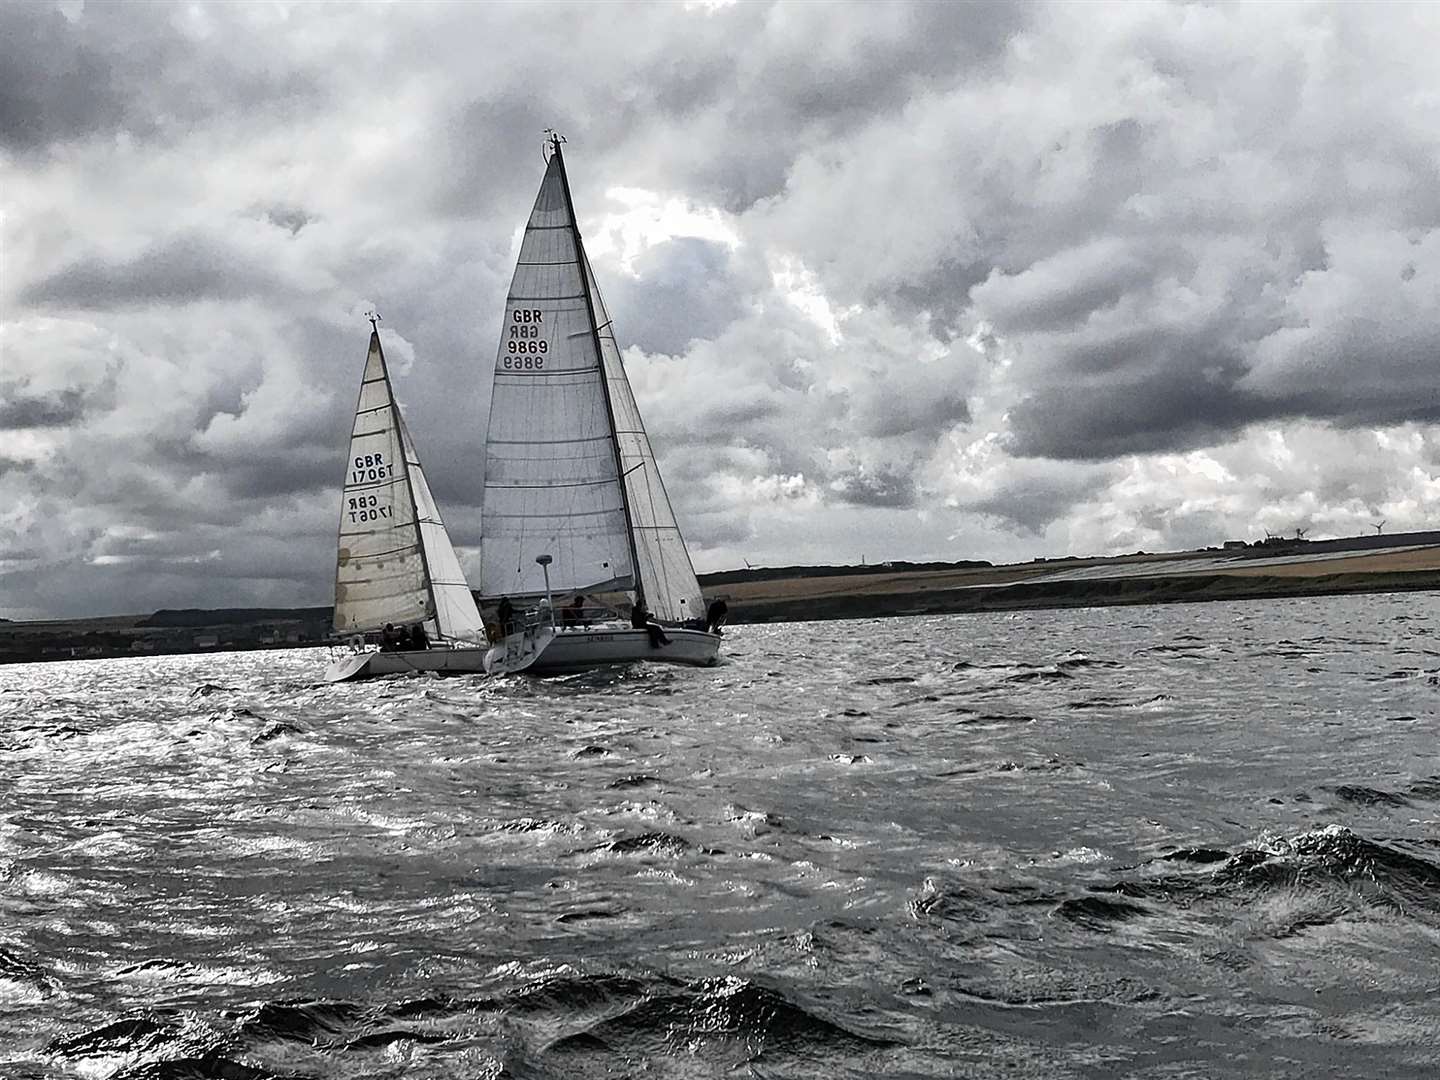 Yachts will take part in races as part of the regatta in Whitehills on Saturday.